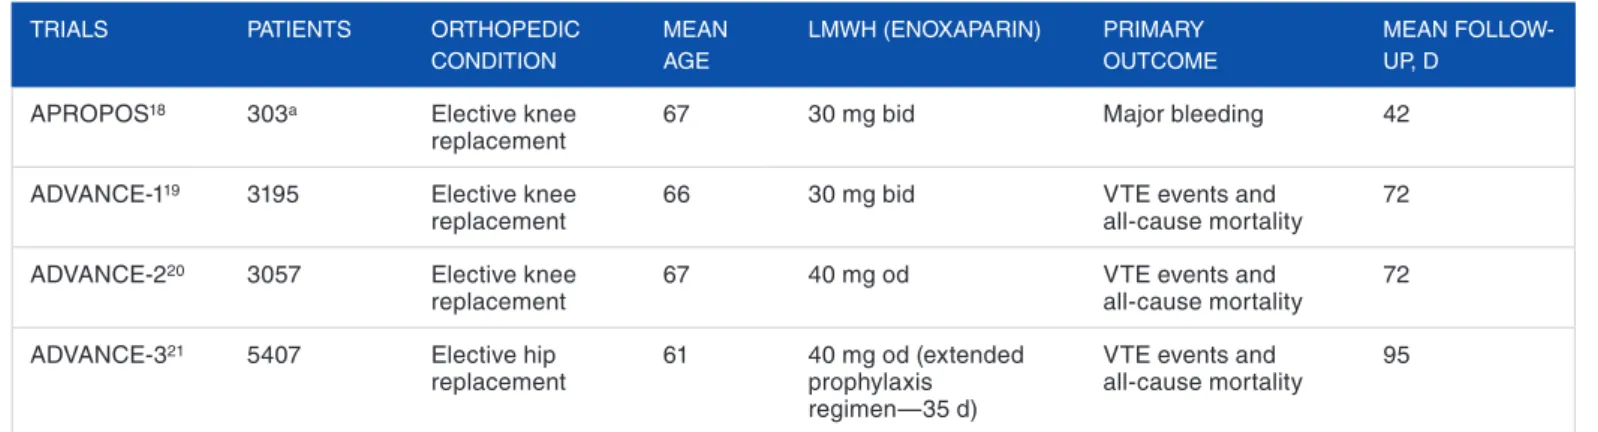 Table 1.  Main characteristics of included studies comparing apixaban 2.5 mg twice daily versus LMWH.